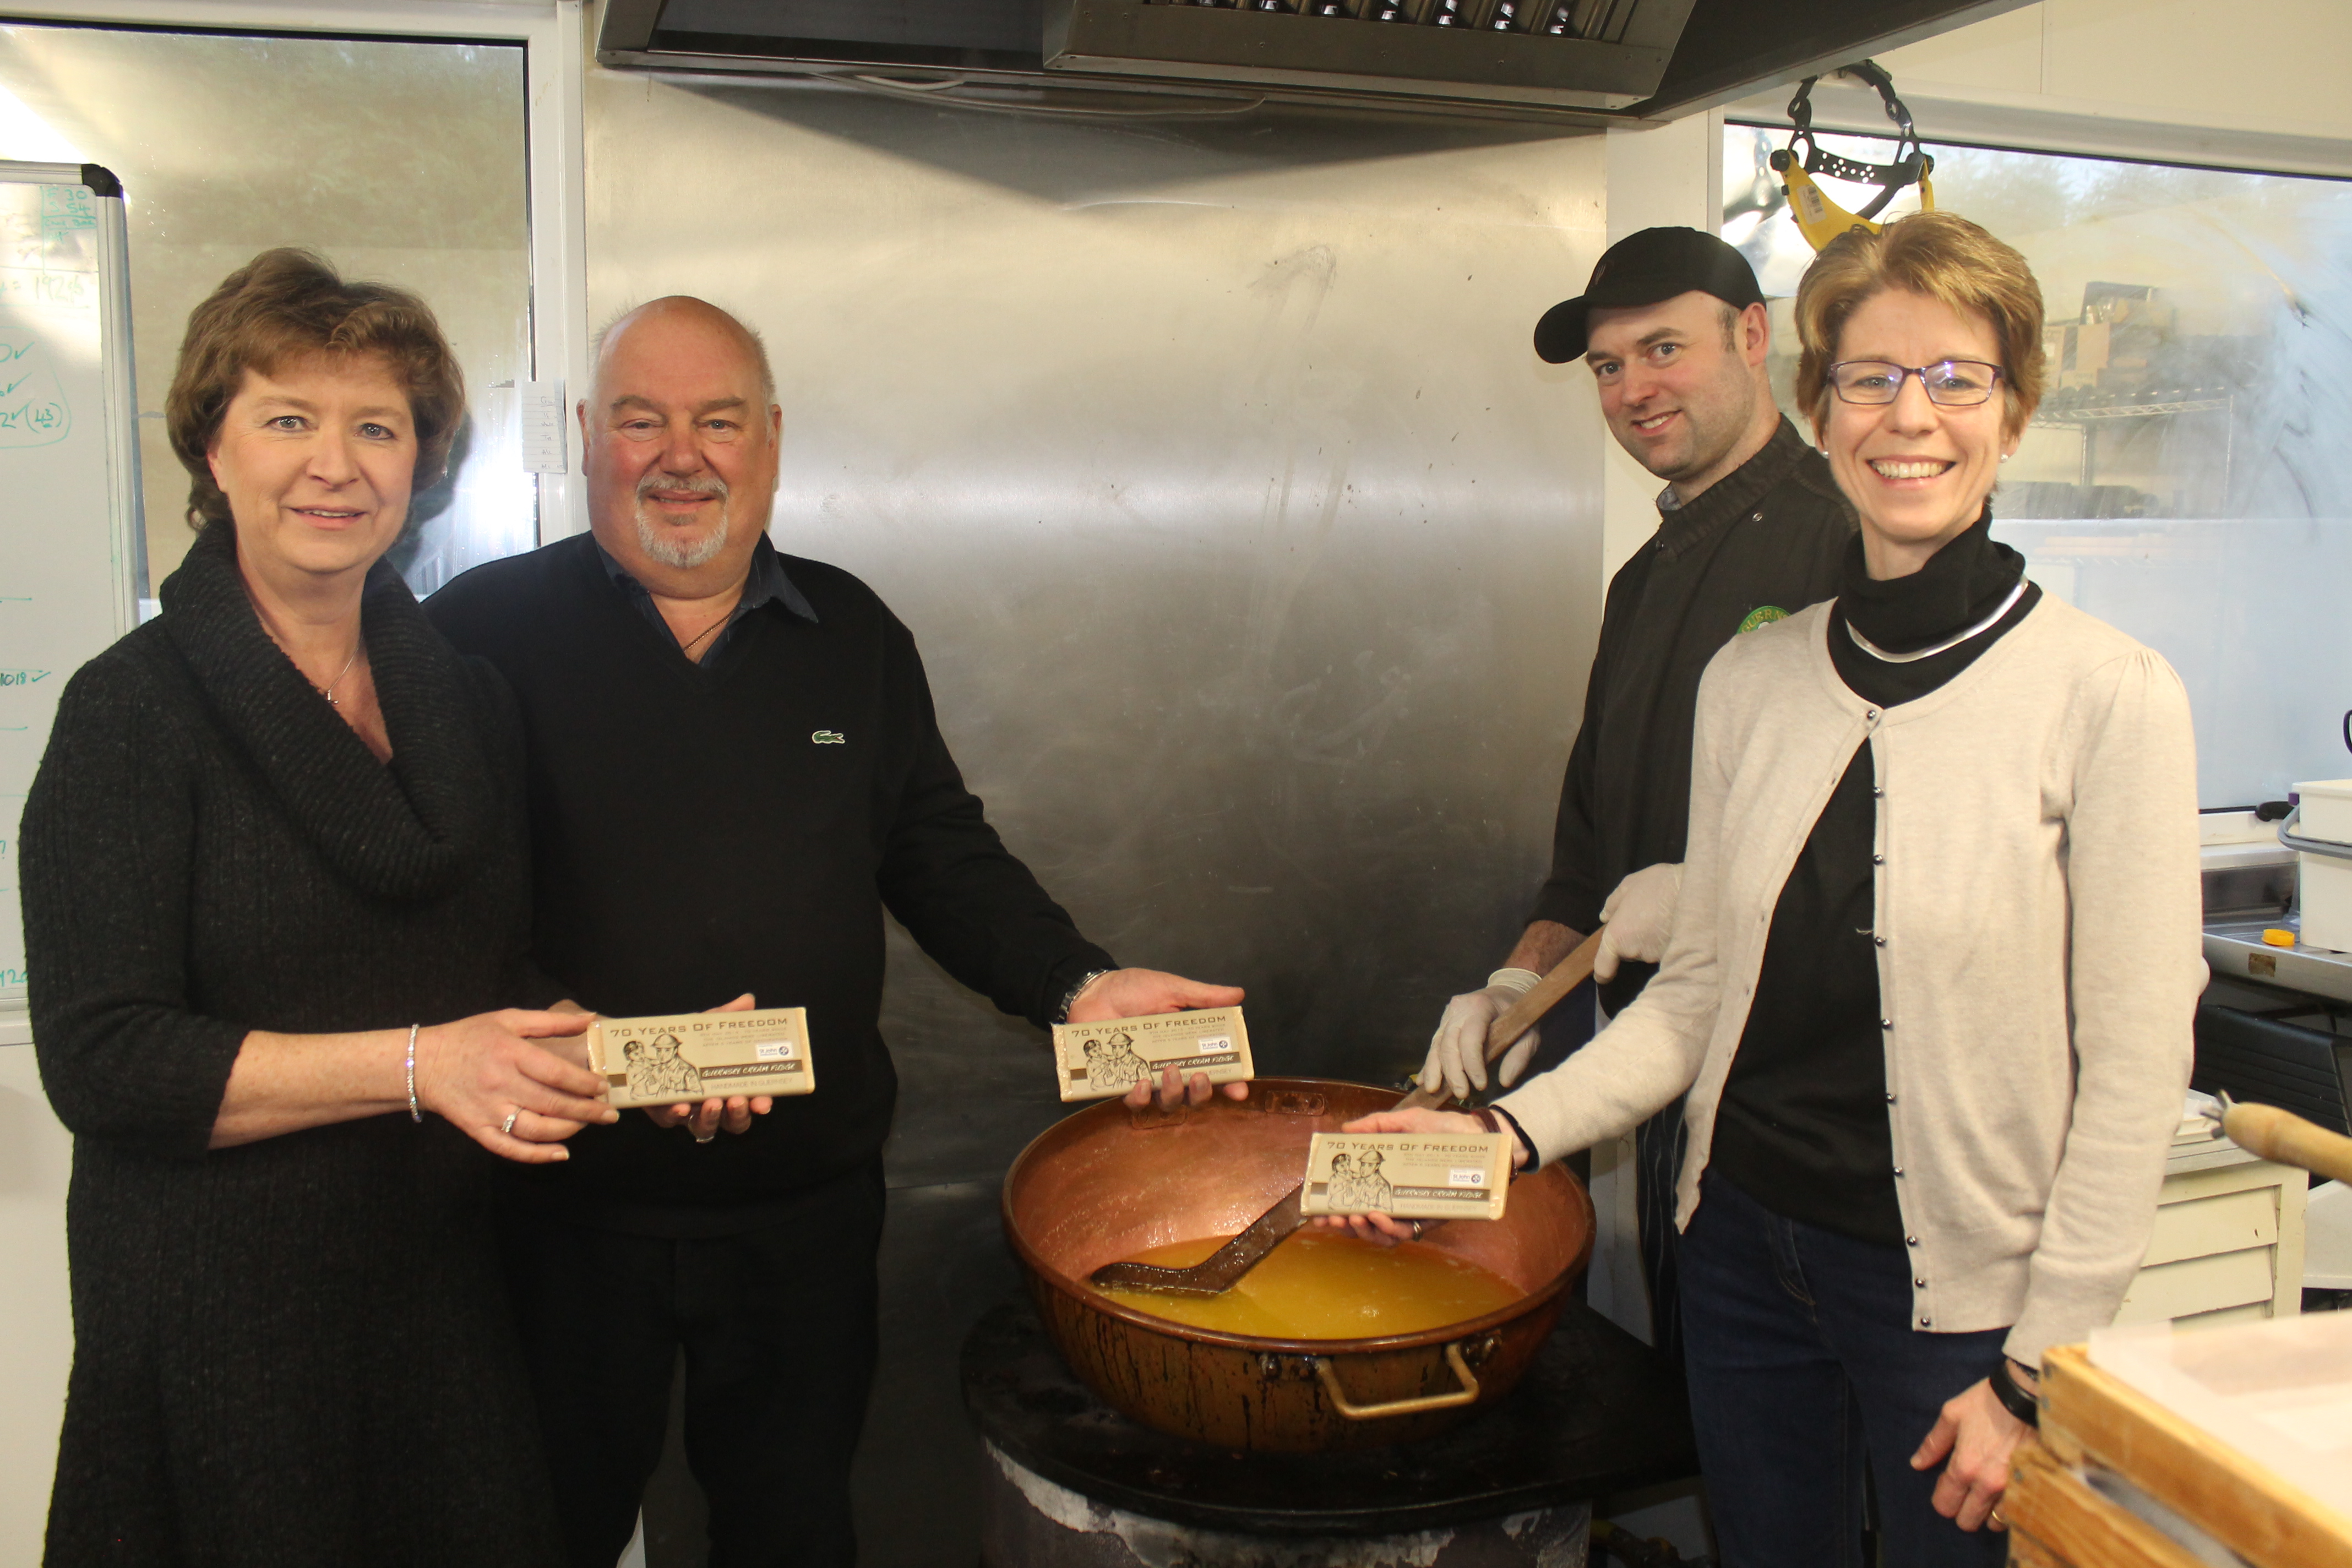 Rosemary and Terry Willey, left, co-owners of Guernsey Gourmet Fudge and chef Craig Wynstone and Vanessa Spiller, right, chief executive officer of the Commandery of St John